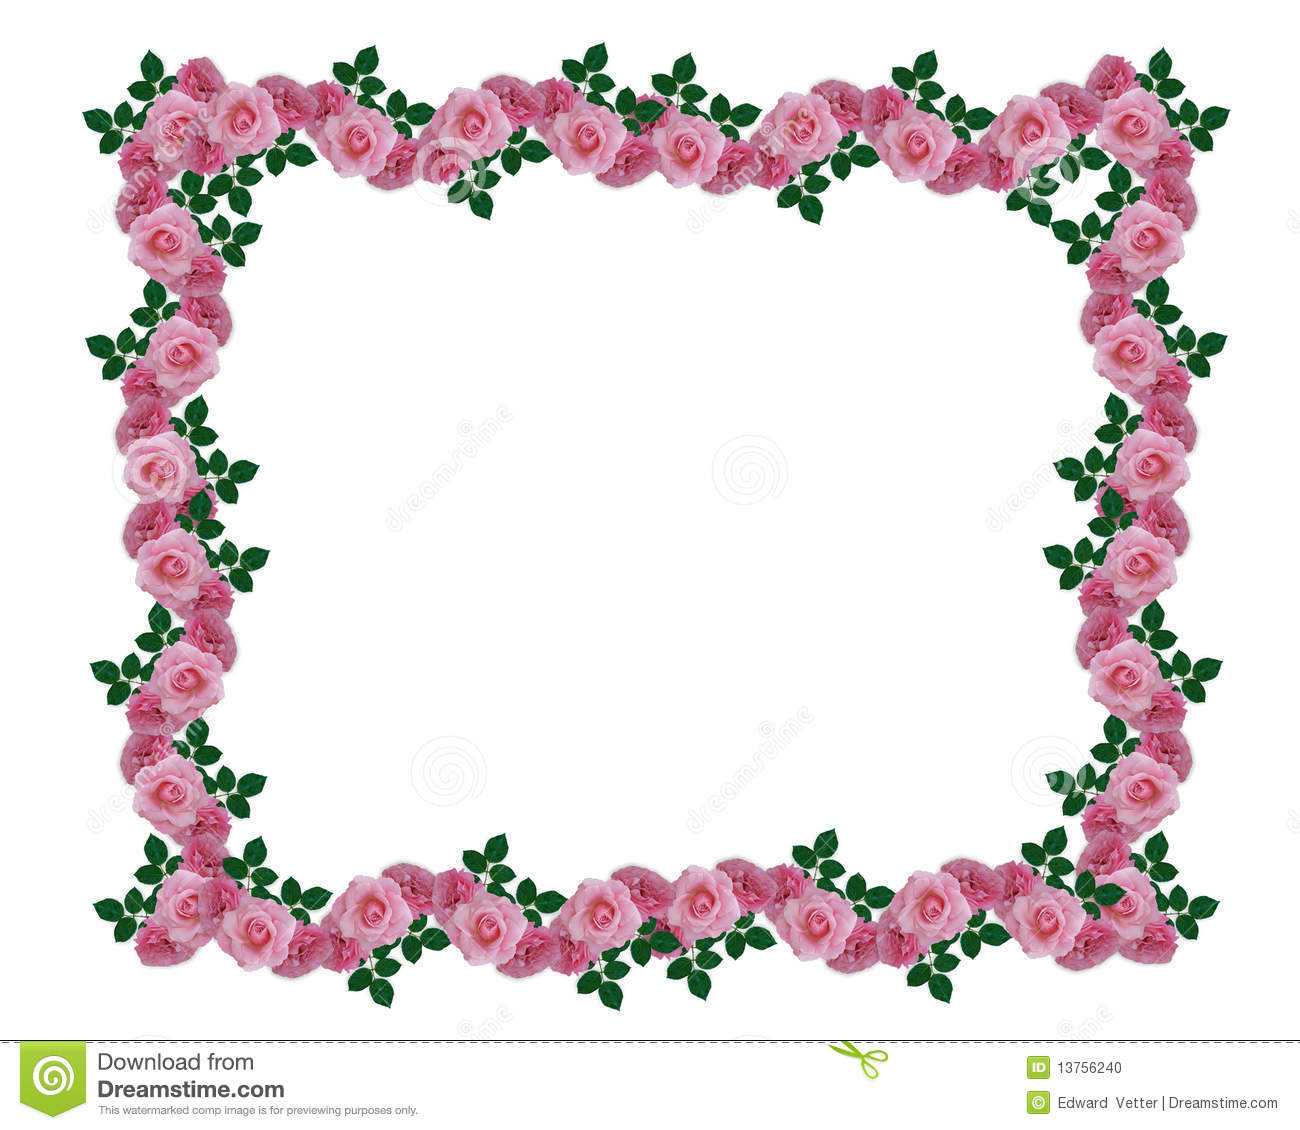 Image And Illustration Composition Of Pink Roses Garland For Wedding